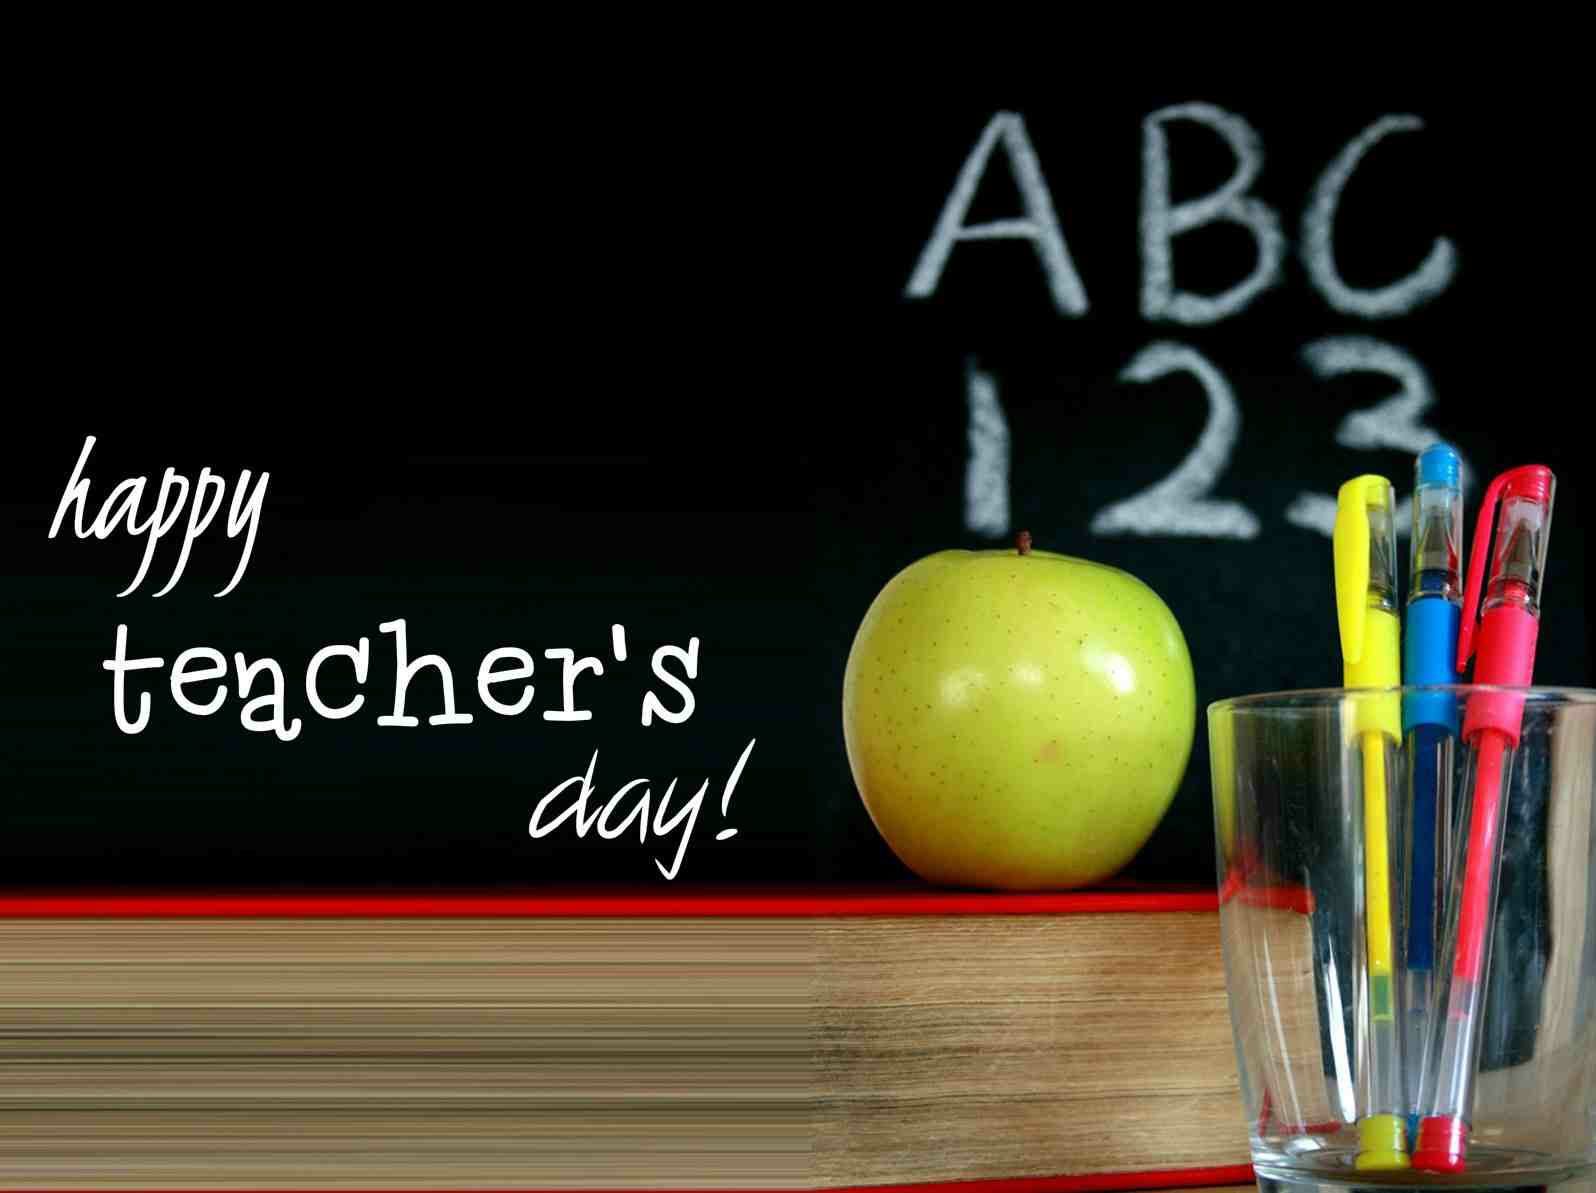 Happy World Teachers’ Day  Apple On Book And Pens